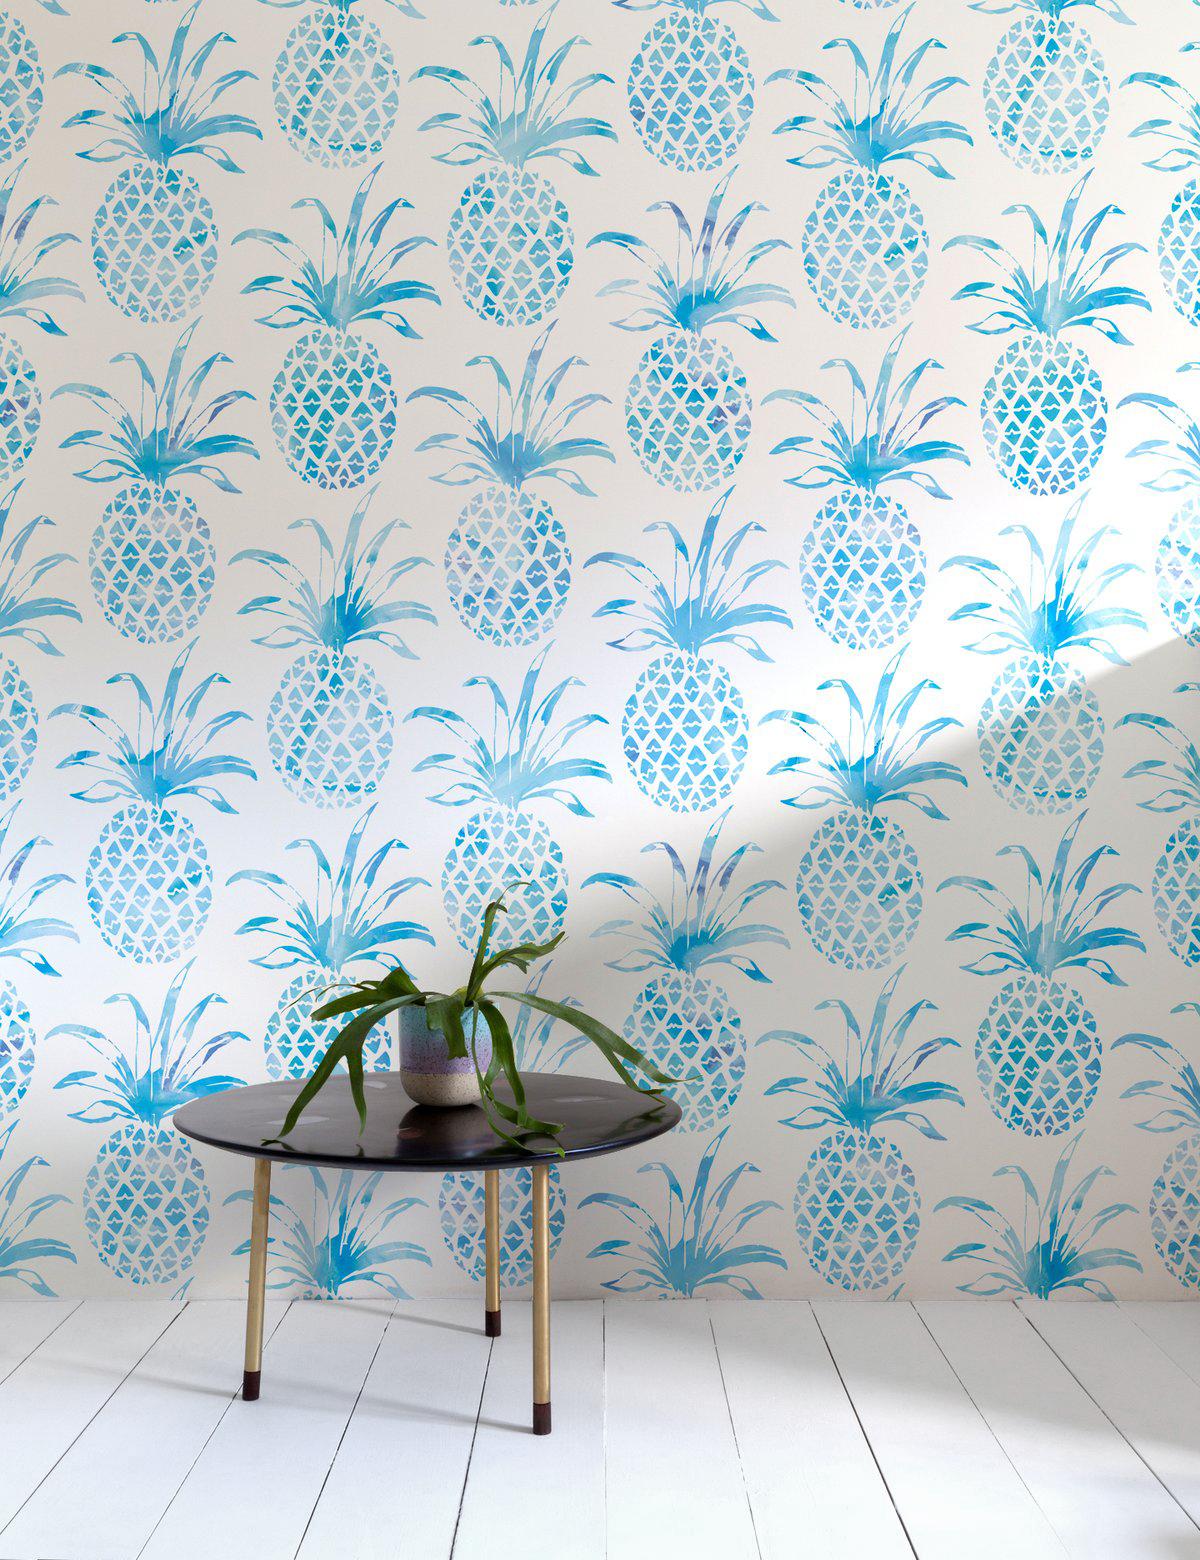 The tropical feeling of Piña Pintada wallpaper is sure to remind you of the islands, all year long.

Printing: Digital pigment print (minimum order of 4 rolls). 
Material: FSC-certified paper. 
Trimming: This product may come pre-trimmed or